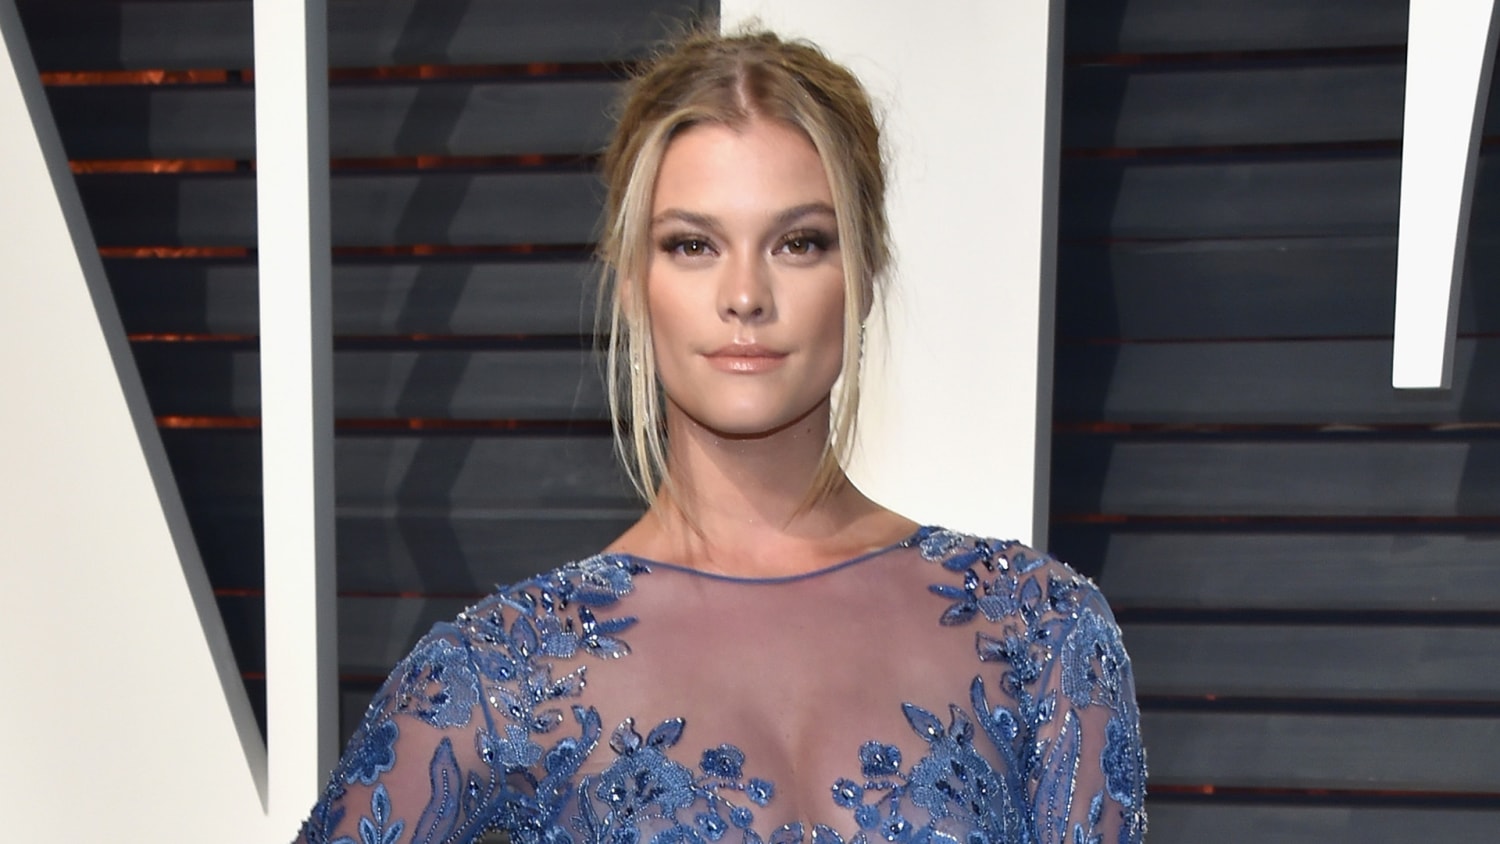 Nina Agdal Reveals She Was Shamed by a Magazine Over Her Size